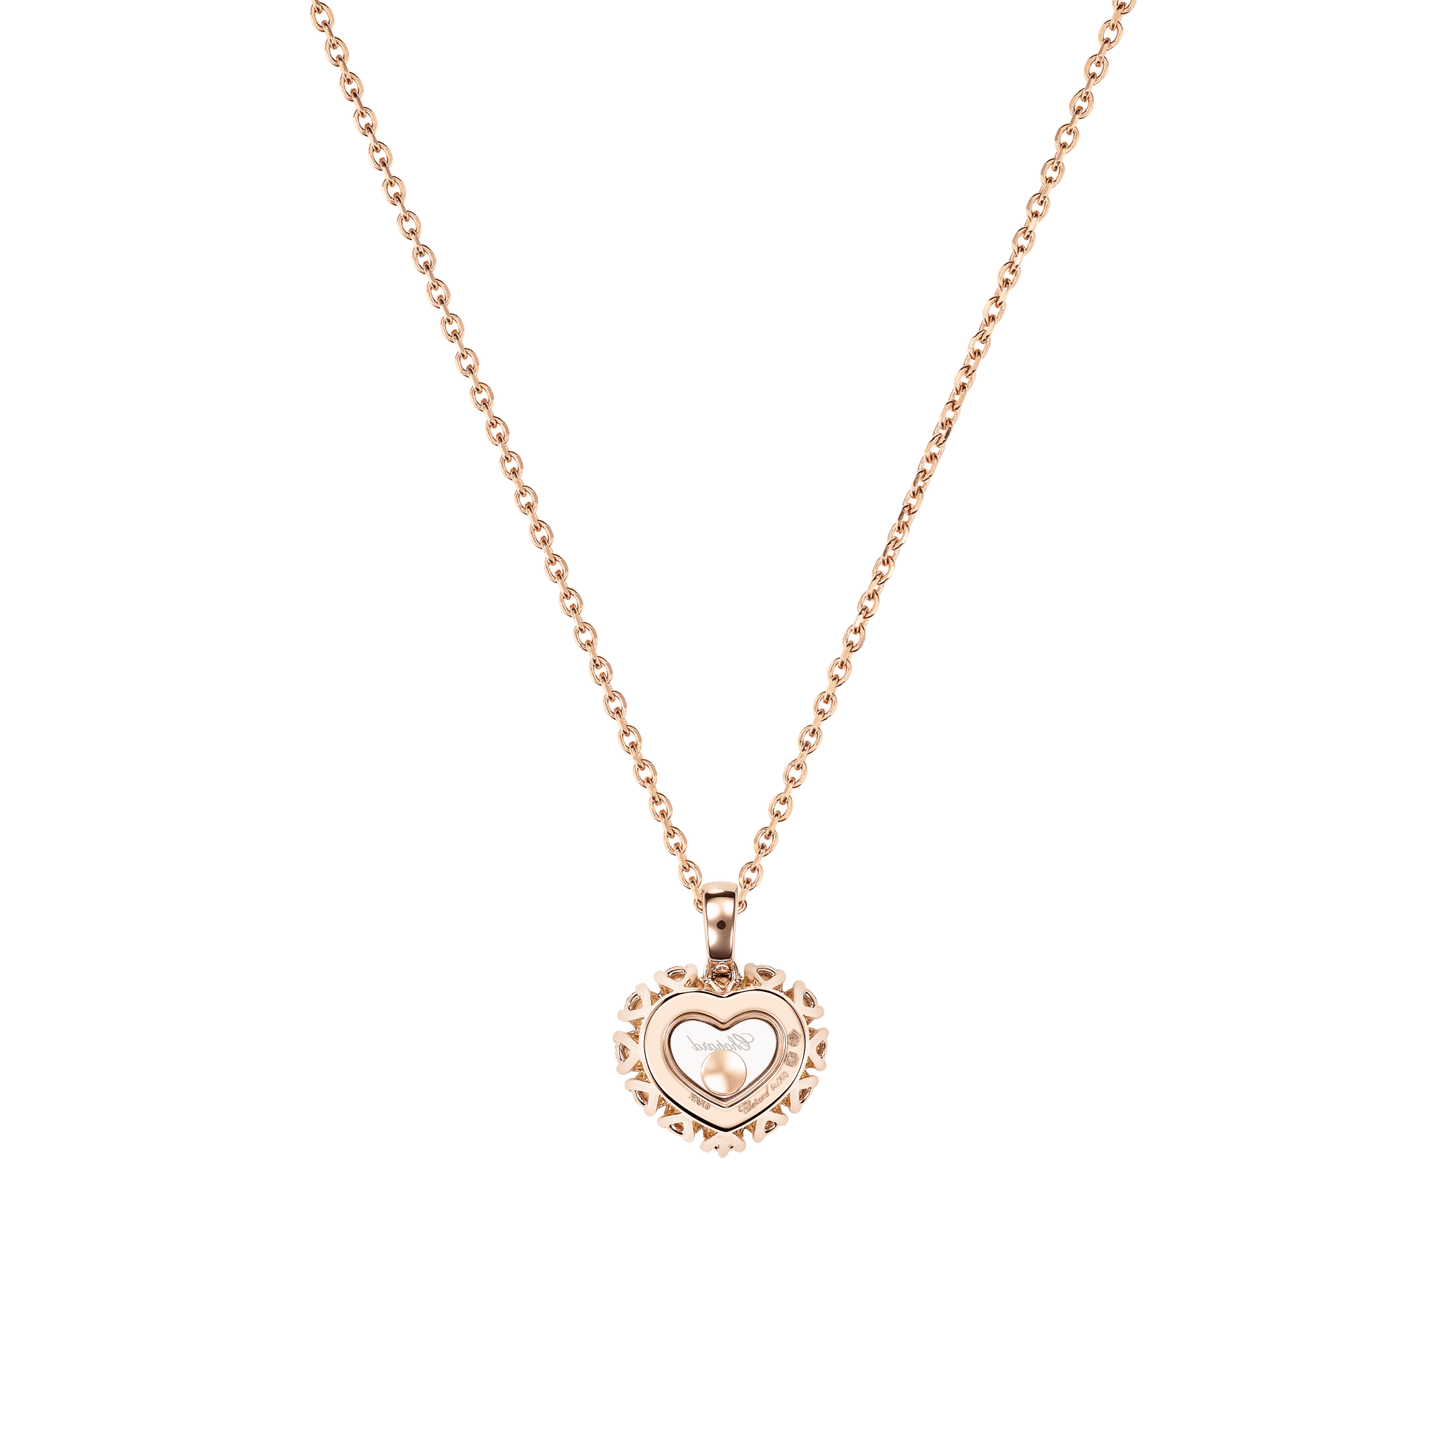 HAPPY DIAMONDS ICONS JOAILLERIE PENDANT, ETHICAL ROSE GOLD, DIAMONDS 79A616-5001